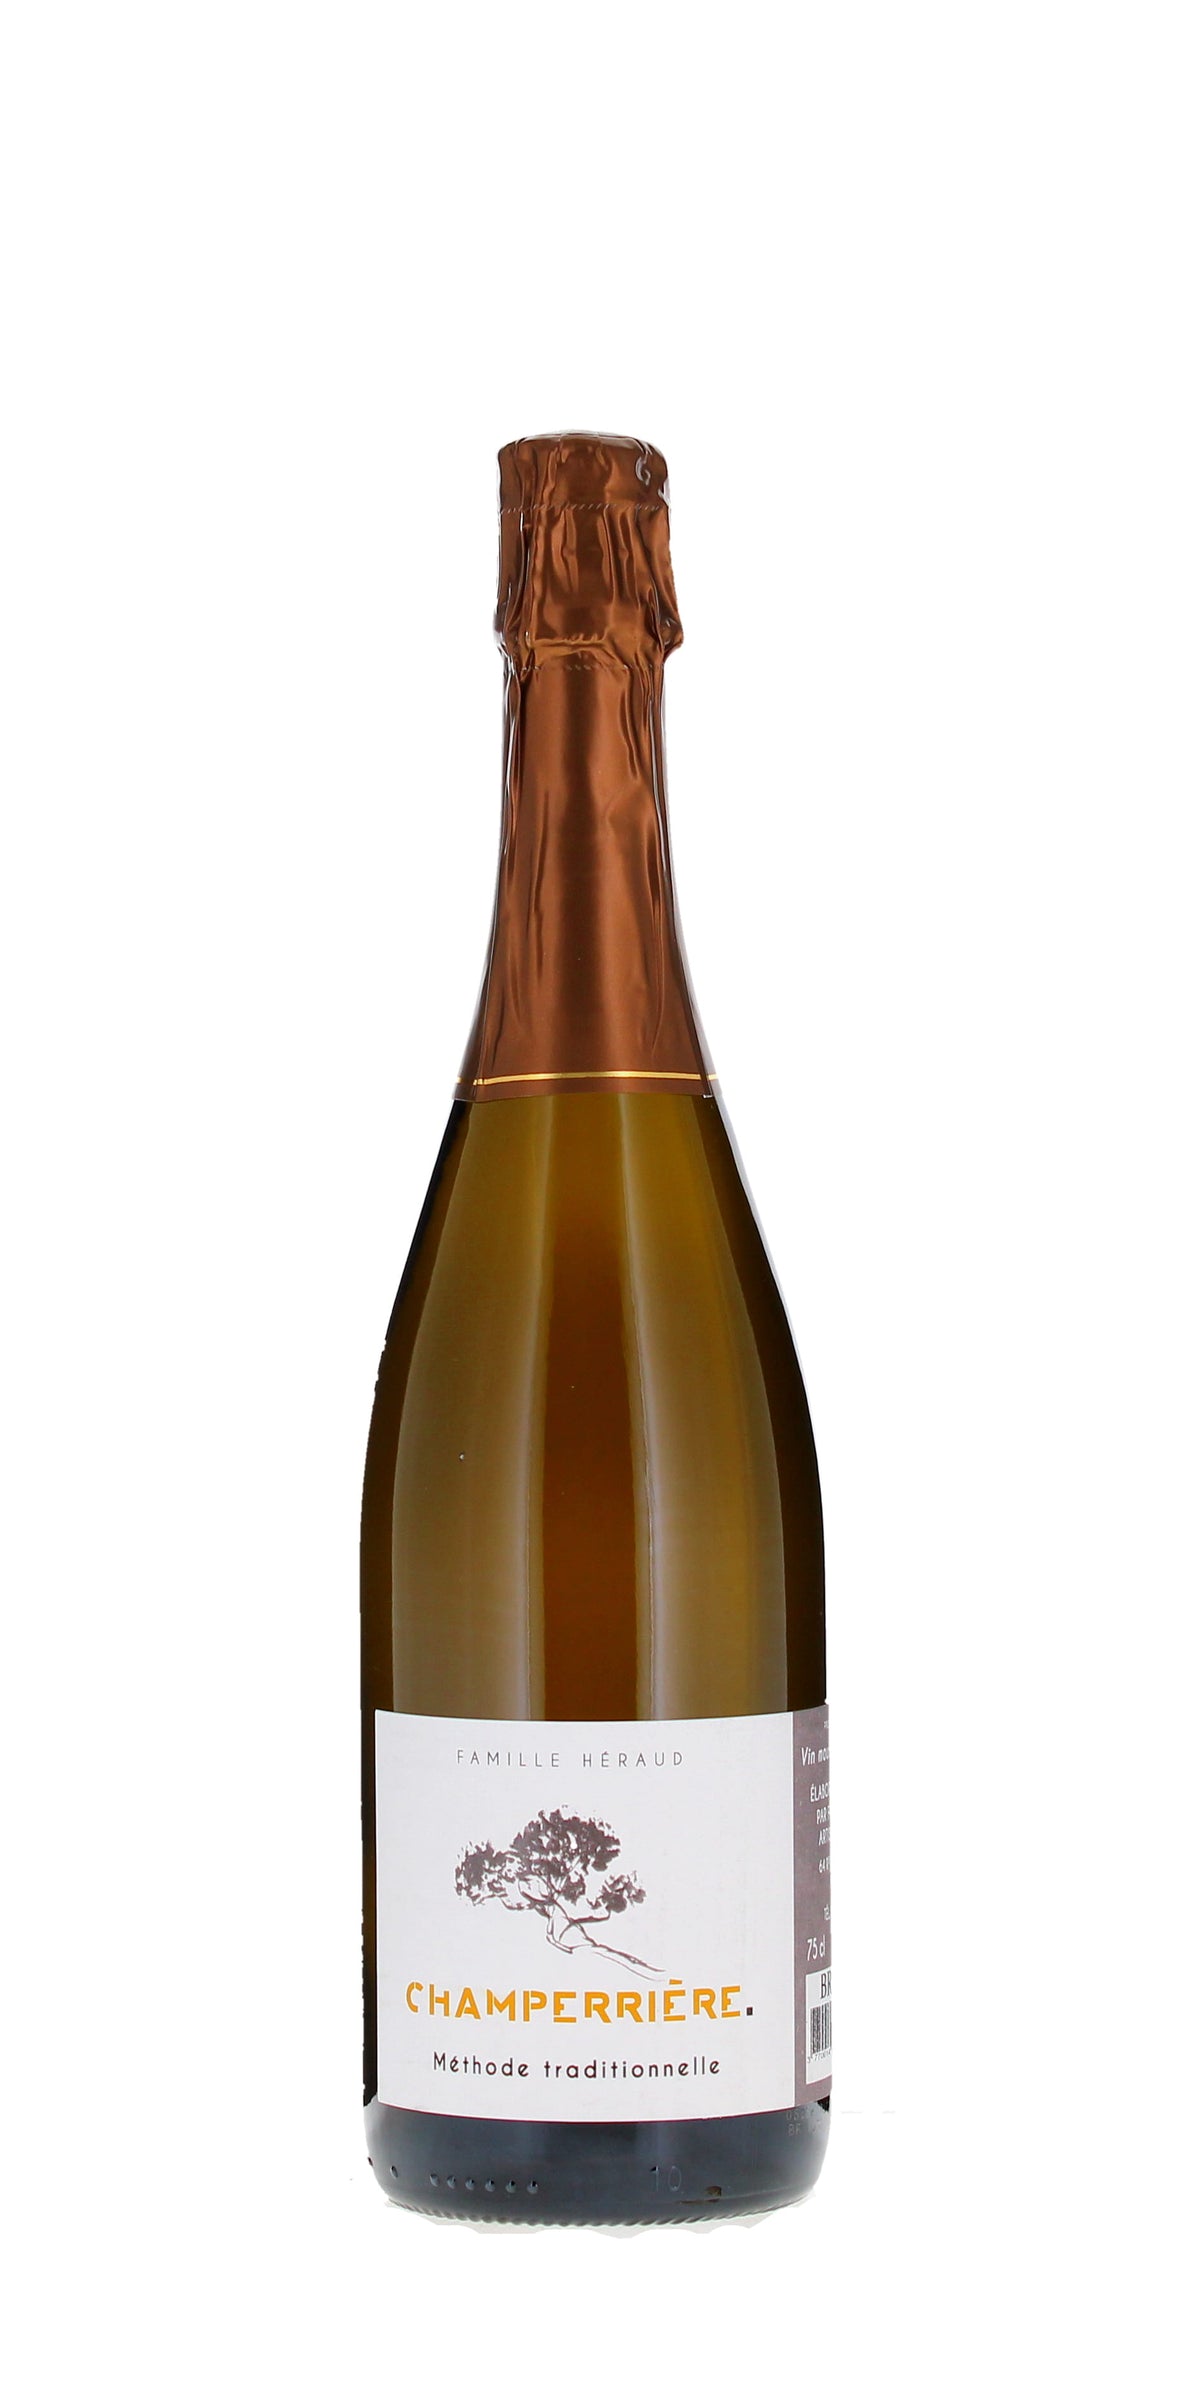 Famille Heraud Champerriere Blanc, Methode Traditionnelle Brut, NV